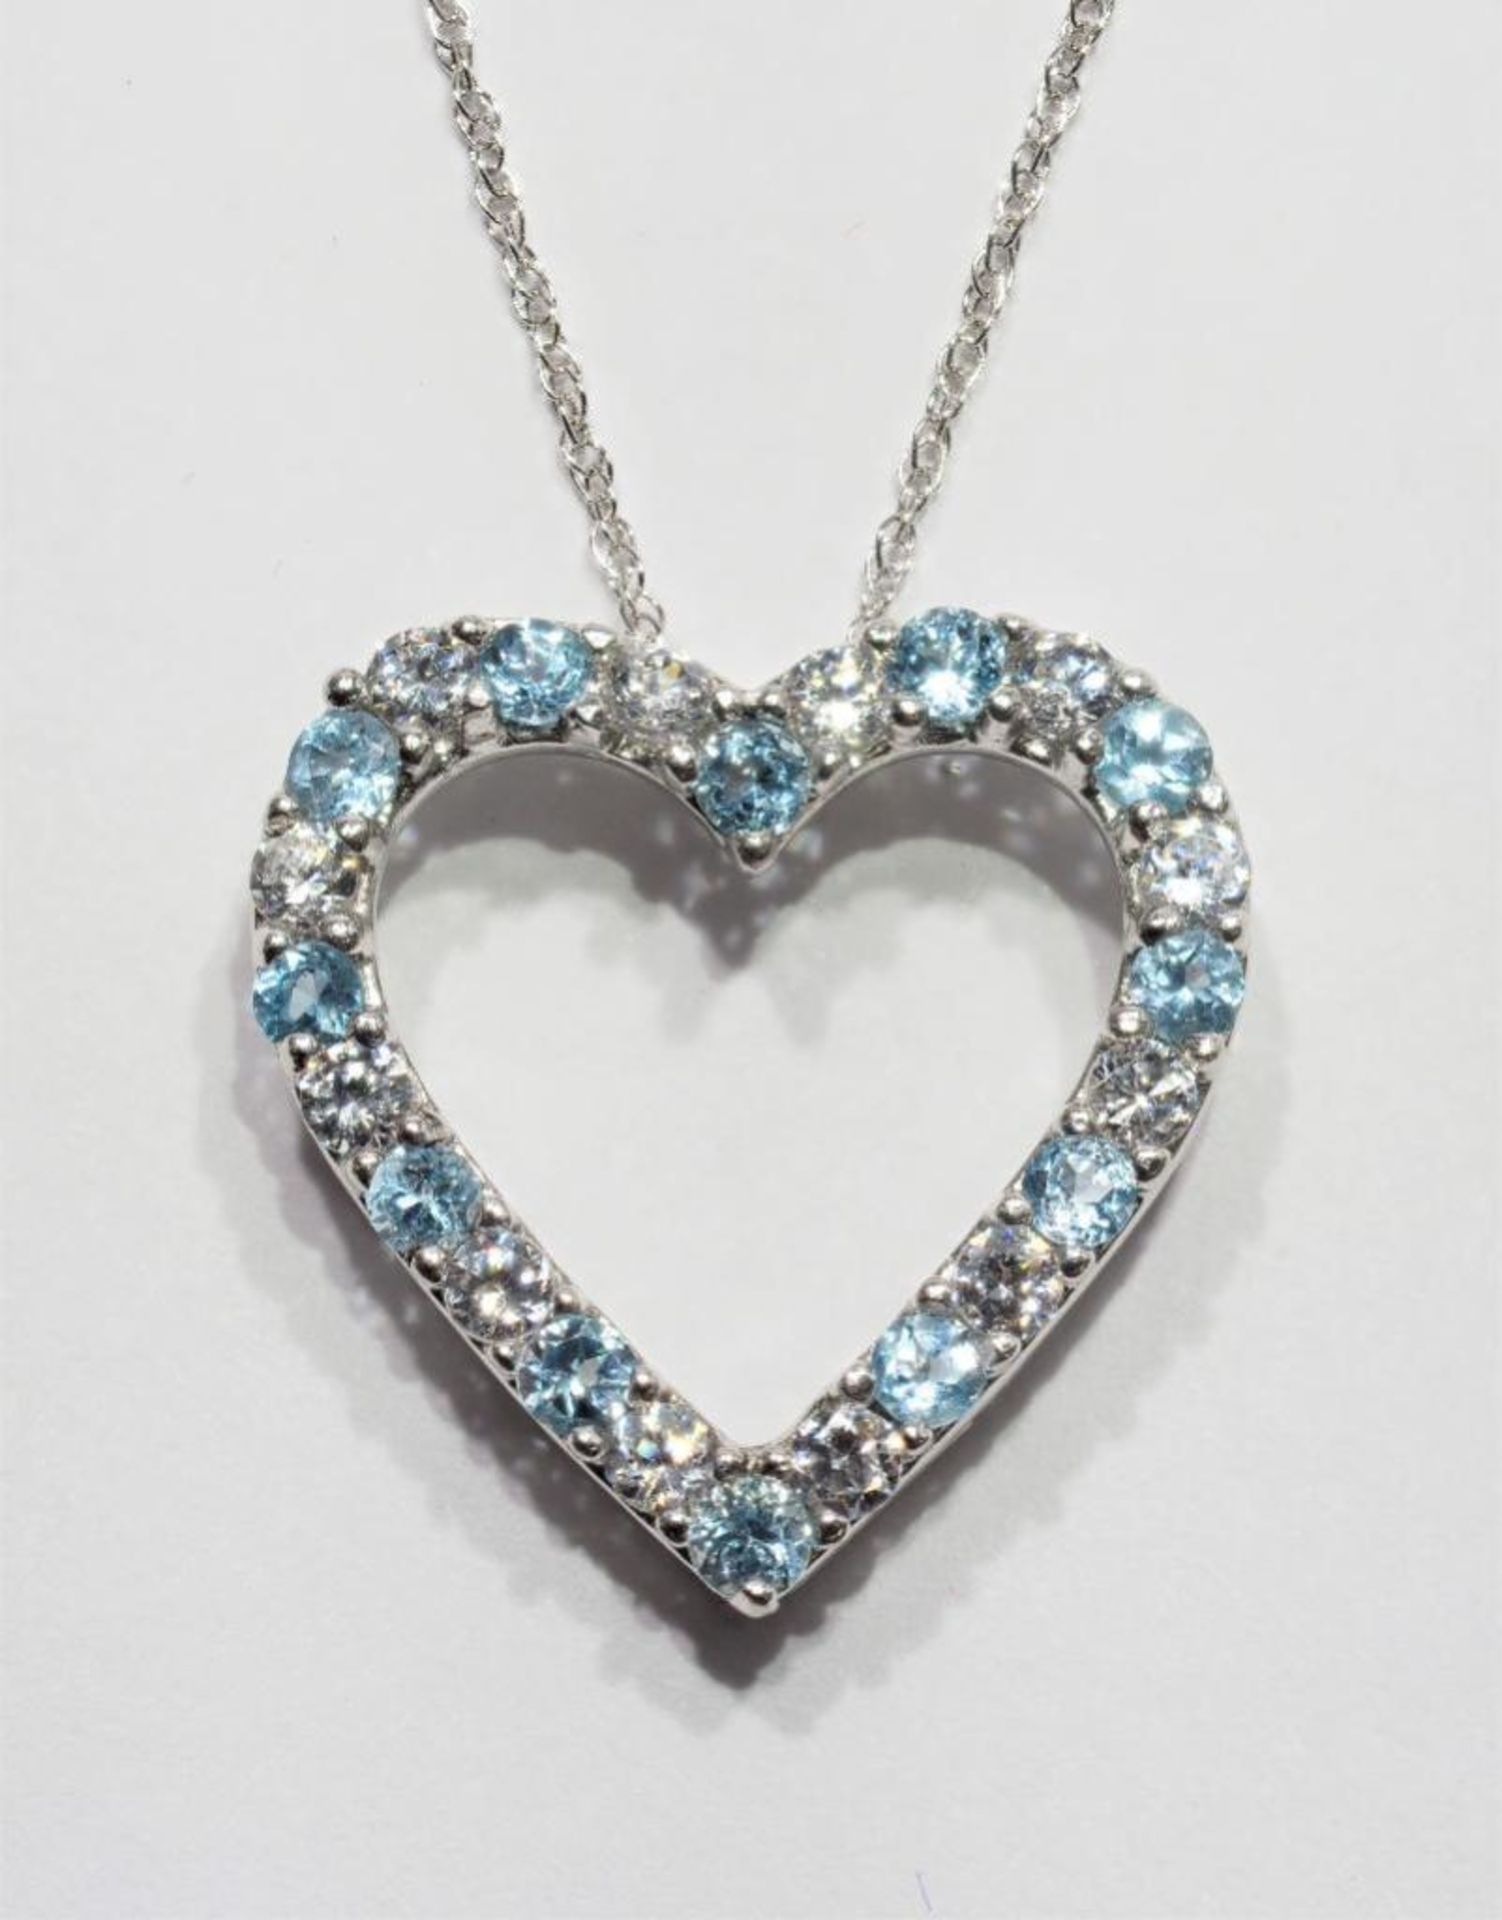 Sterling Silver Genuine Blue Topaz Heart Pendant Necklace with Chain. Retail $250